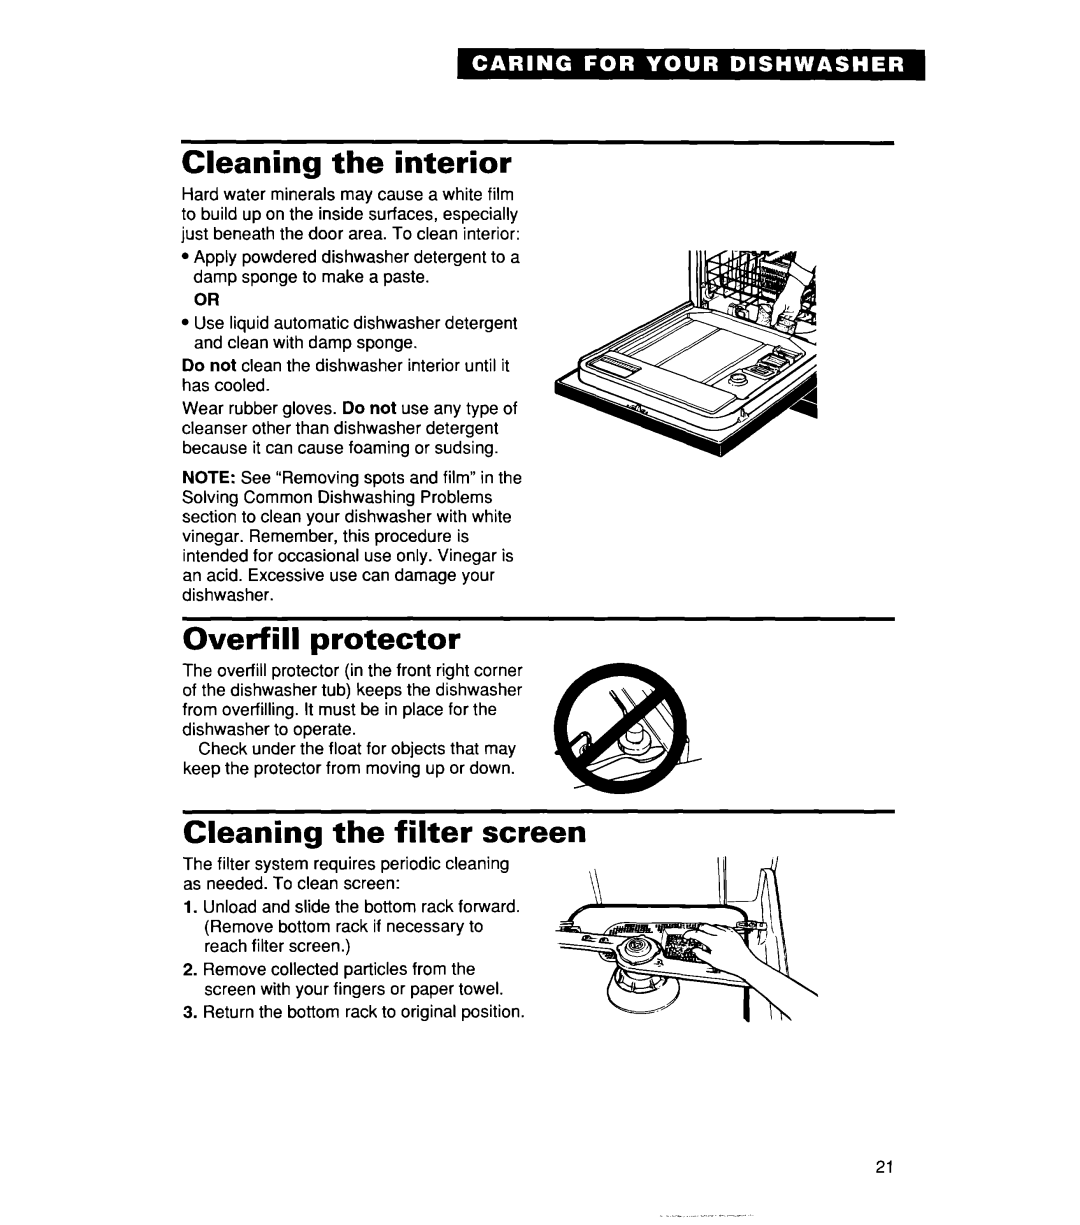 Whirlpool Series 400, 806, 830 warranty Cleaning the interior, Overfill protector, Cleaning the filter screen 